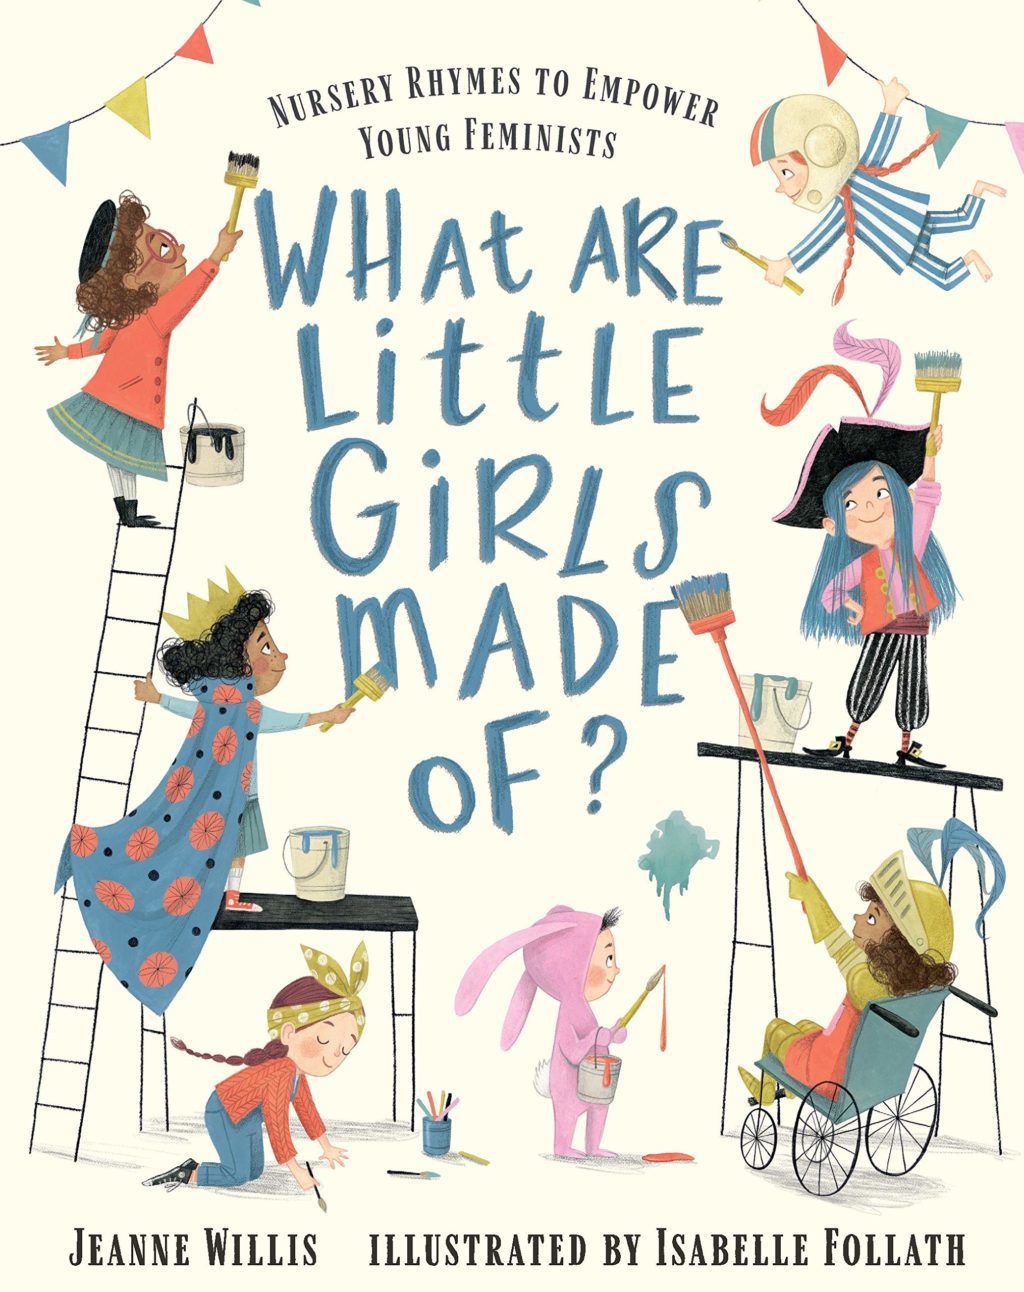 What Are Little Girls Made Of? Nursery Rhymes for Feminist Times Written by Jeanne Willis, illustrated by Isabelle Follath